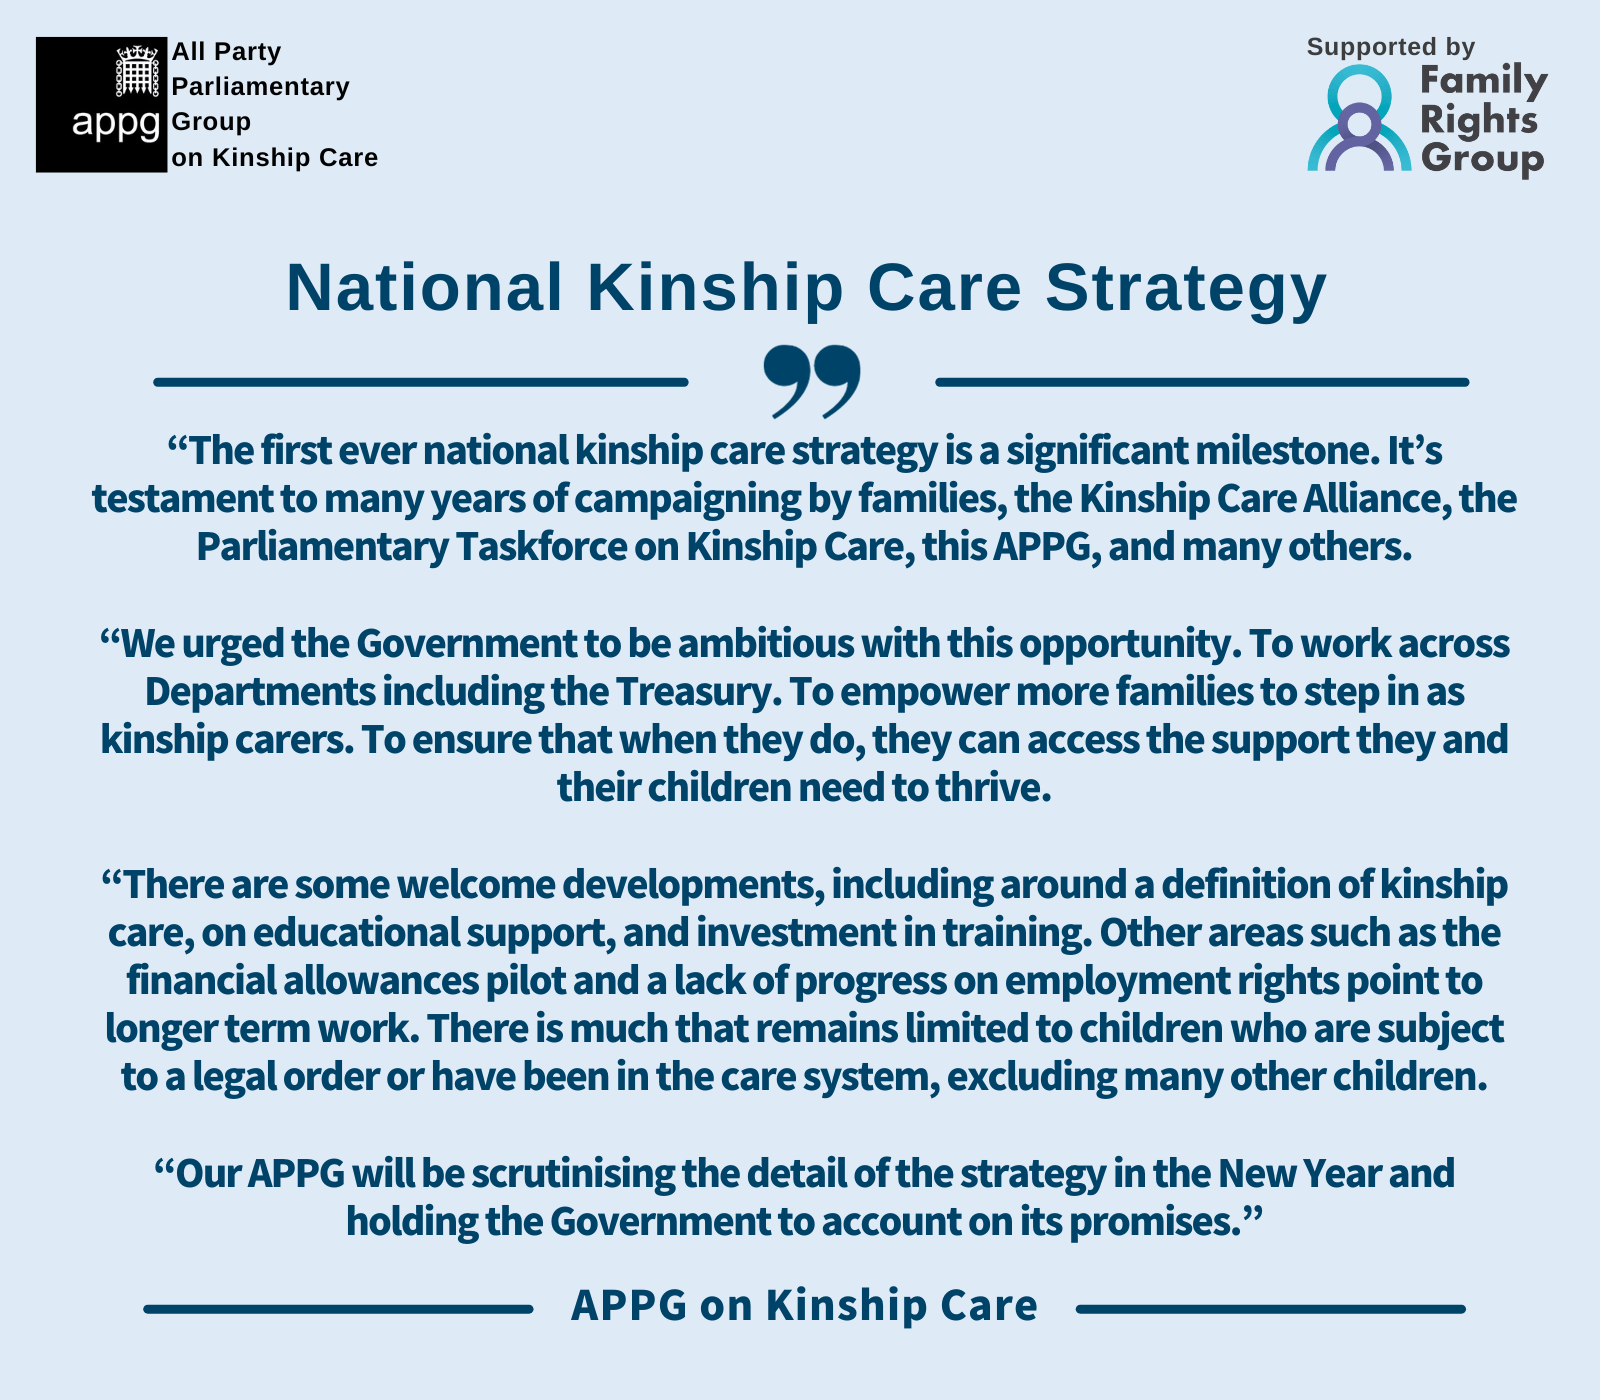 “The first ever national kinship care strategy is a significant milestone. It’s testament to many years of campaigning by families, the Kinship Care Alliance, the Parliamentary Taskforce on Kinship Care, this APPG, and many others. “We urged the Government to be ambitious with this opportunity. To work across Departments including the Treasury. To empower more families to step in as kinship carers. To ensure that when they do, they can access the support they and their children need to thrive. “There are some welcome developments, including around a definition of kinship care, on educational support, and investment in training. Other areas such as the financial allowances pilot and a lack of progress on employment rights point to longer term work. There is much that remains limited to children who are subject to a legal order or have been in the care system, excluding many other children. “Our APPG will be scrutinising the detail of the strategy in the New Year and holding the Government to account on its promises.”